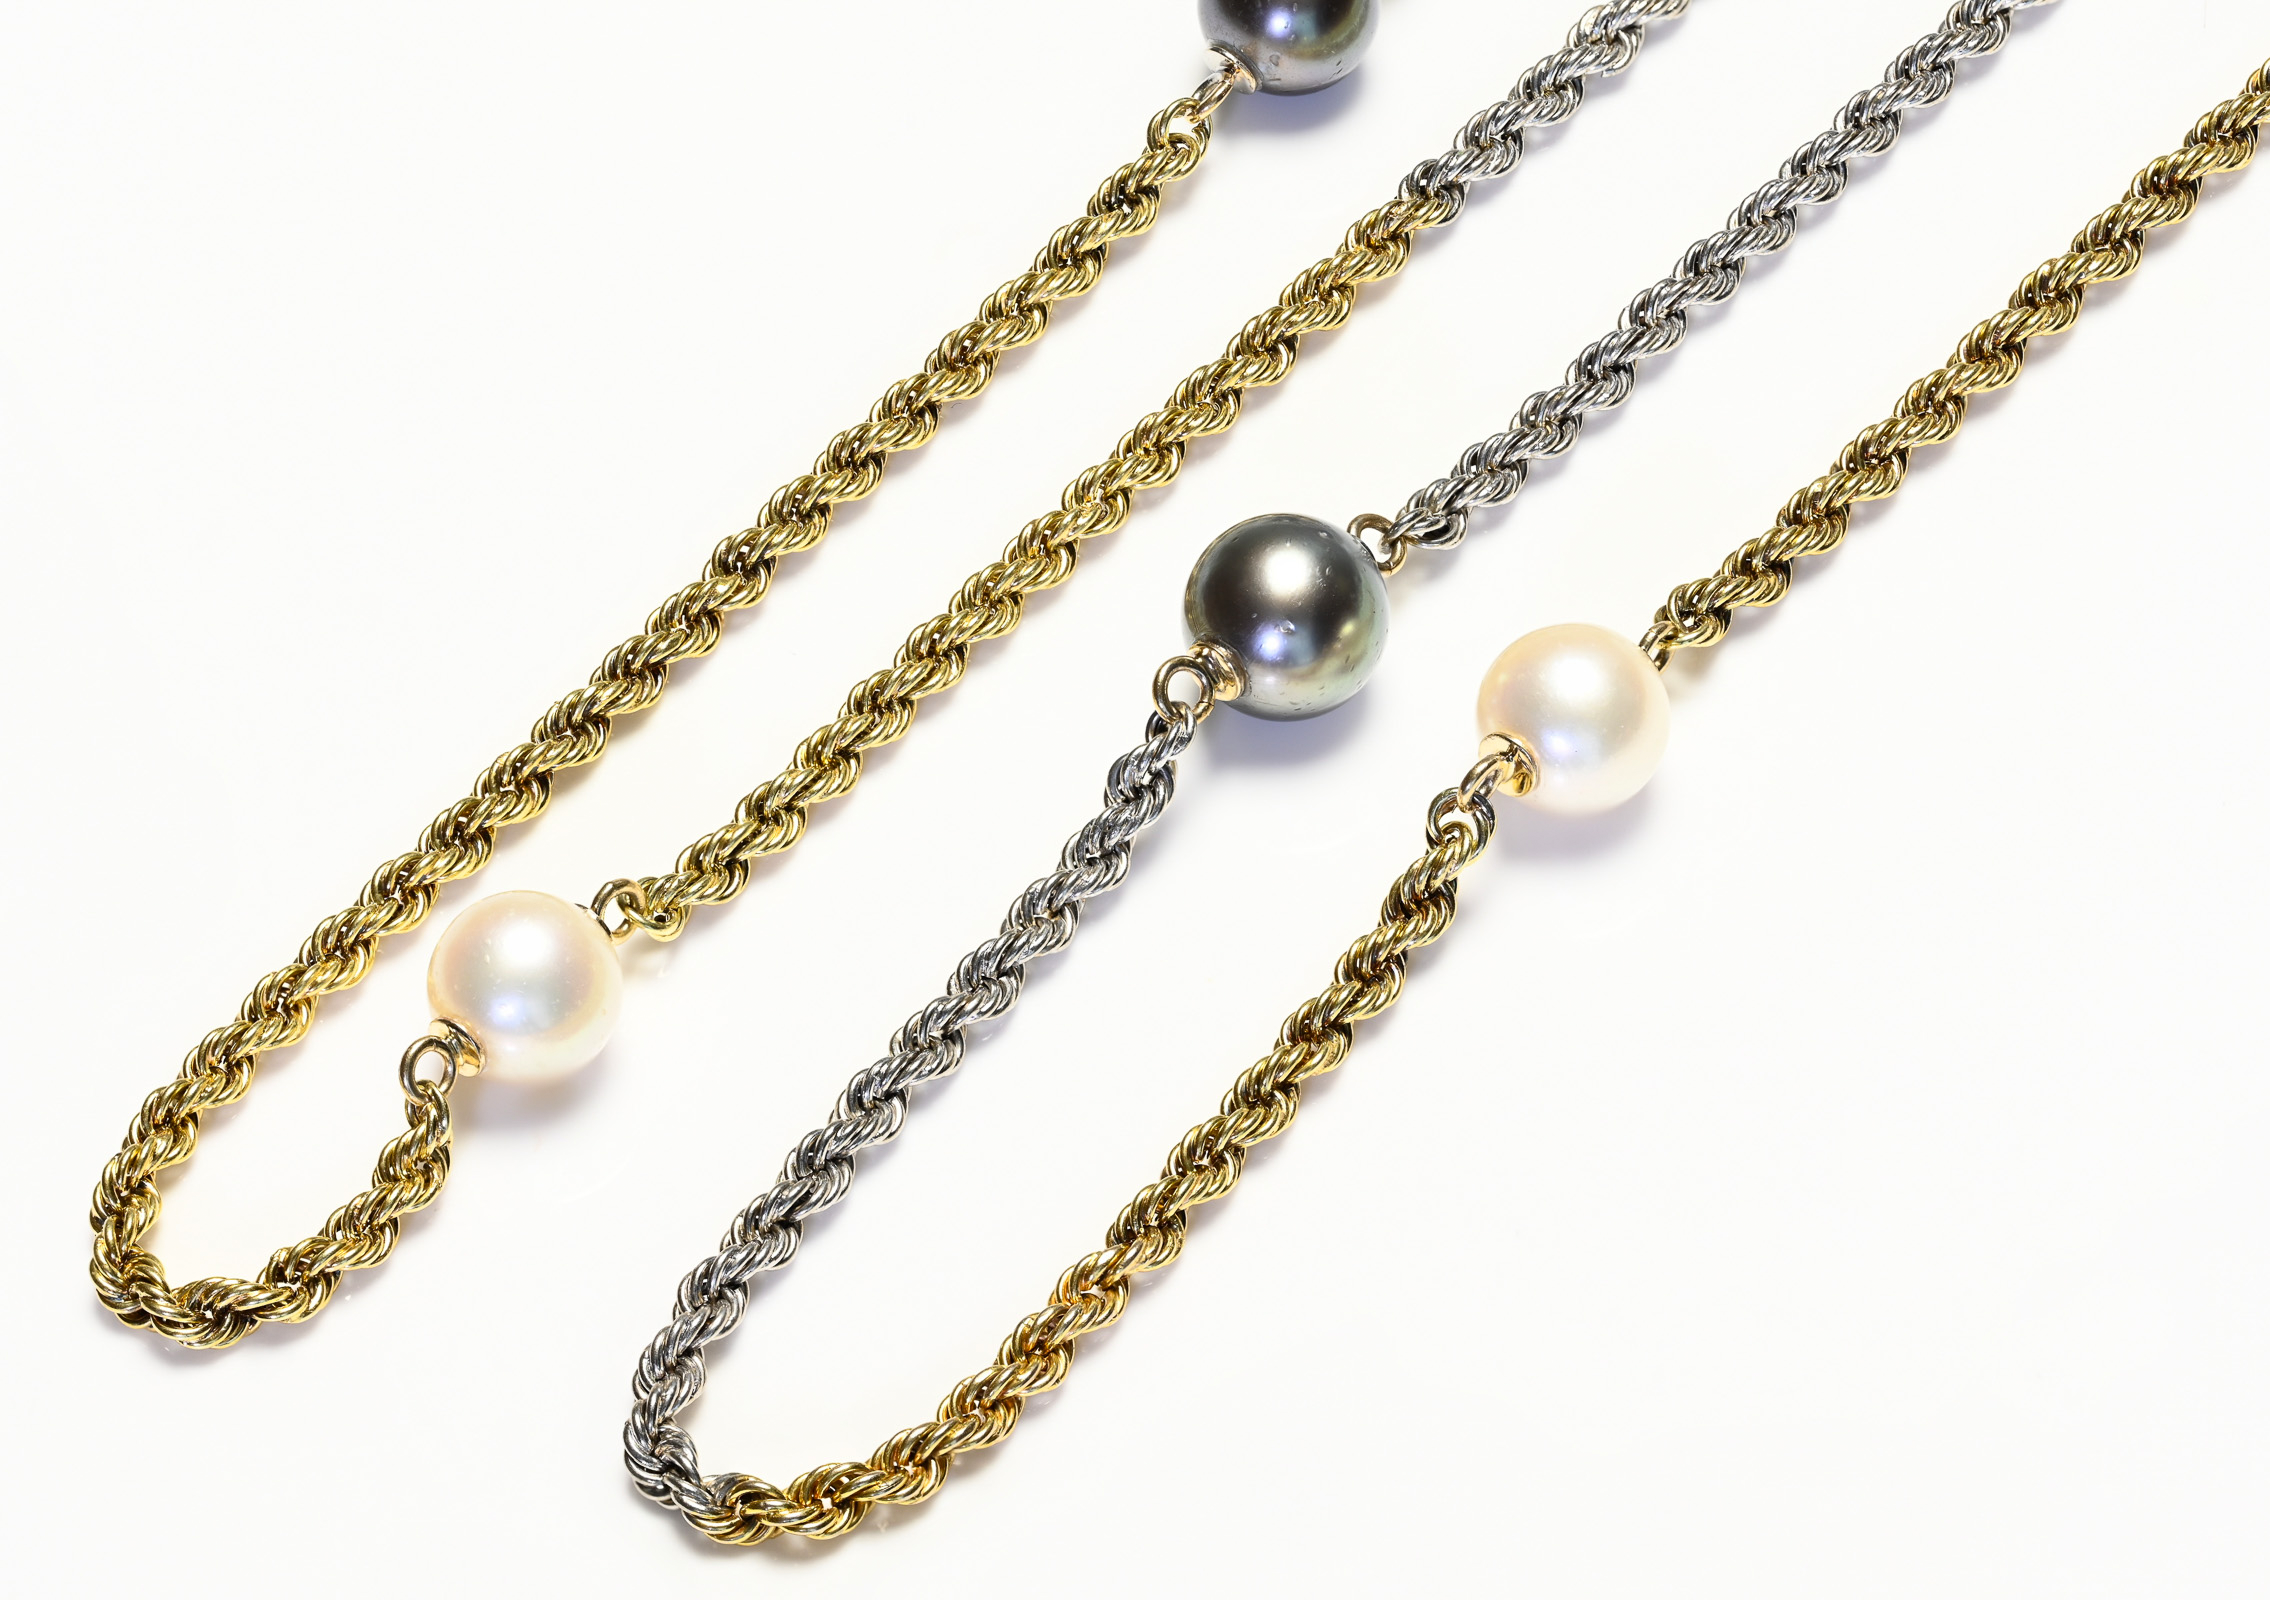 Vintage Two Tone Gold Rope Chain Grey White Pearl Long Necklace